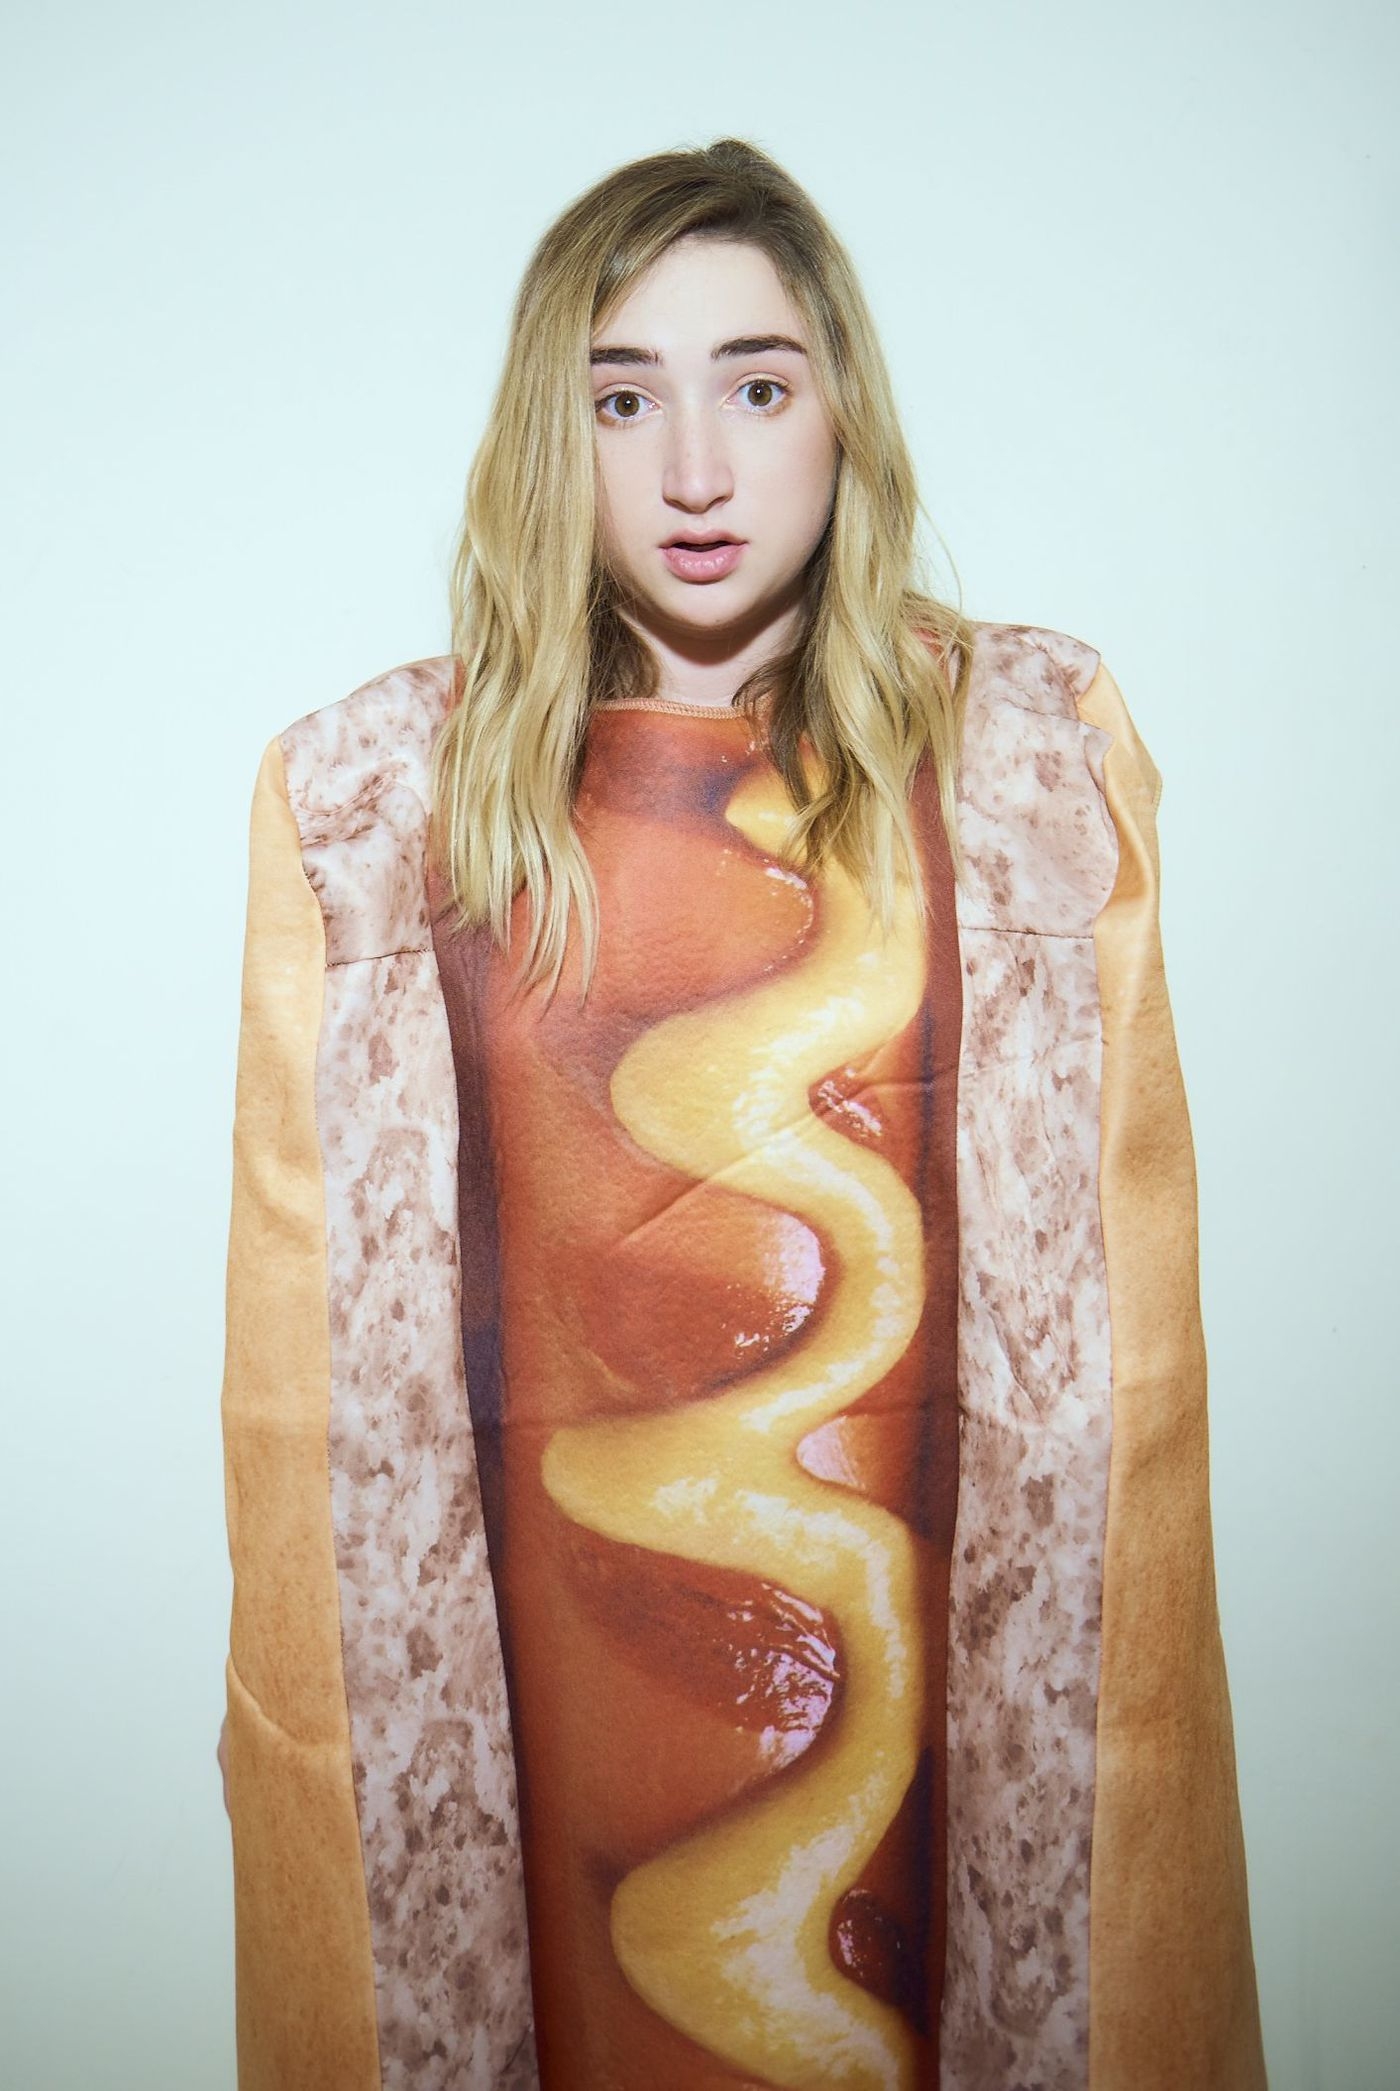 Molly Clark in a hot dog suit.